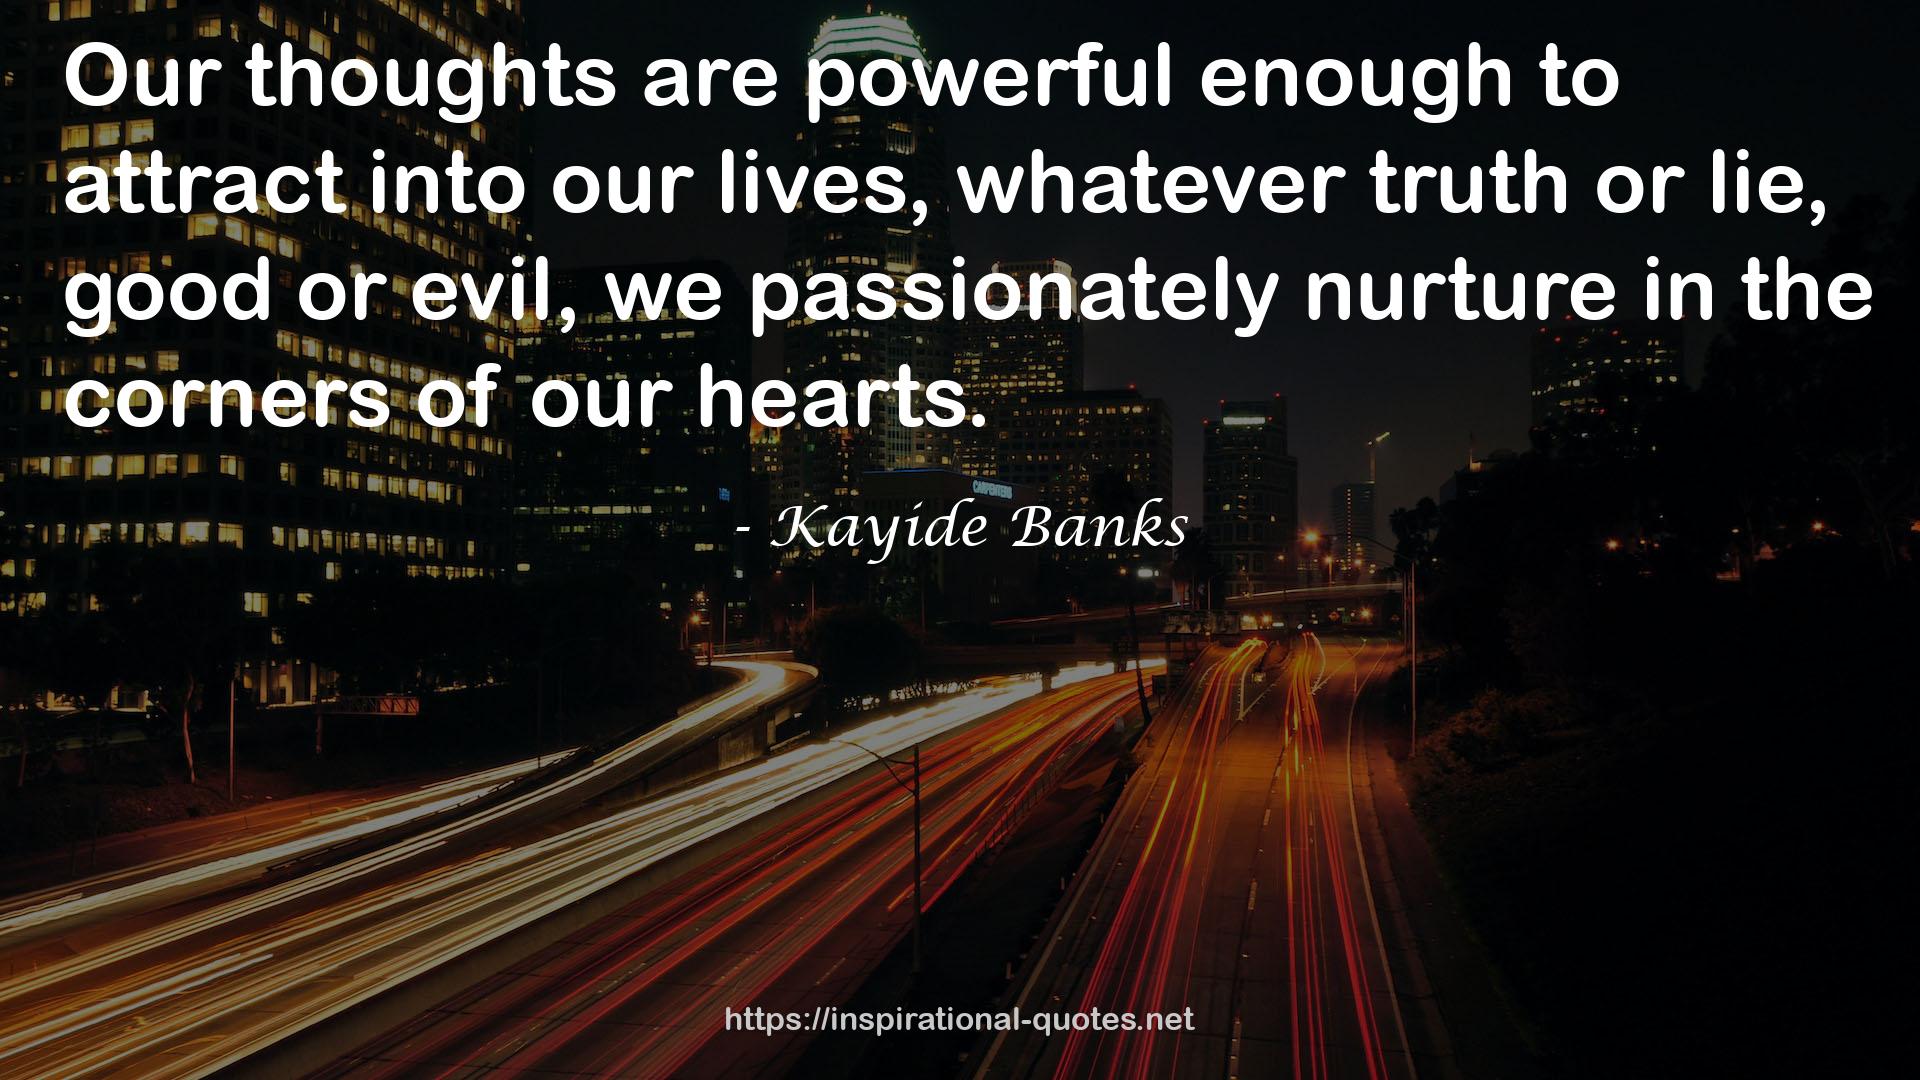 Kayide Banks QUOTES